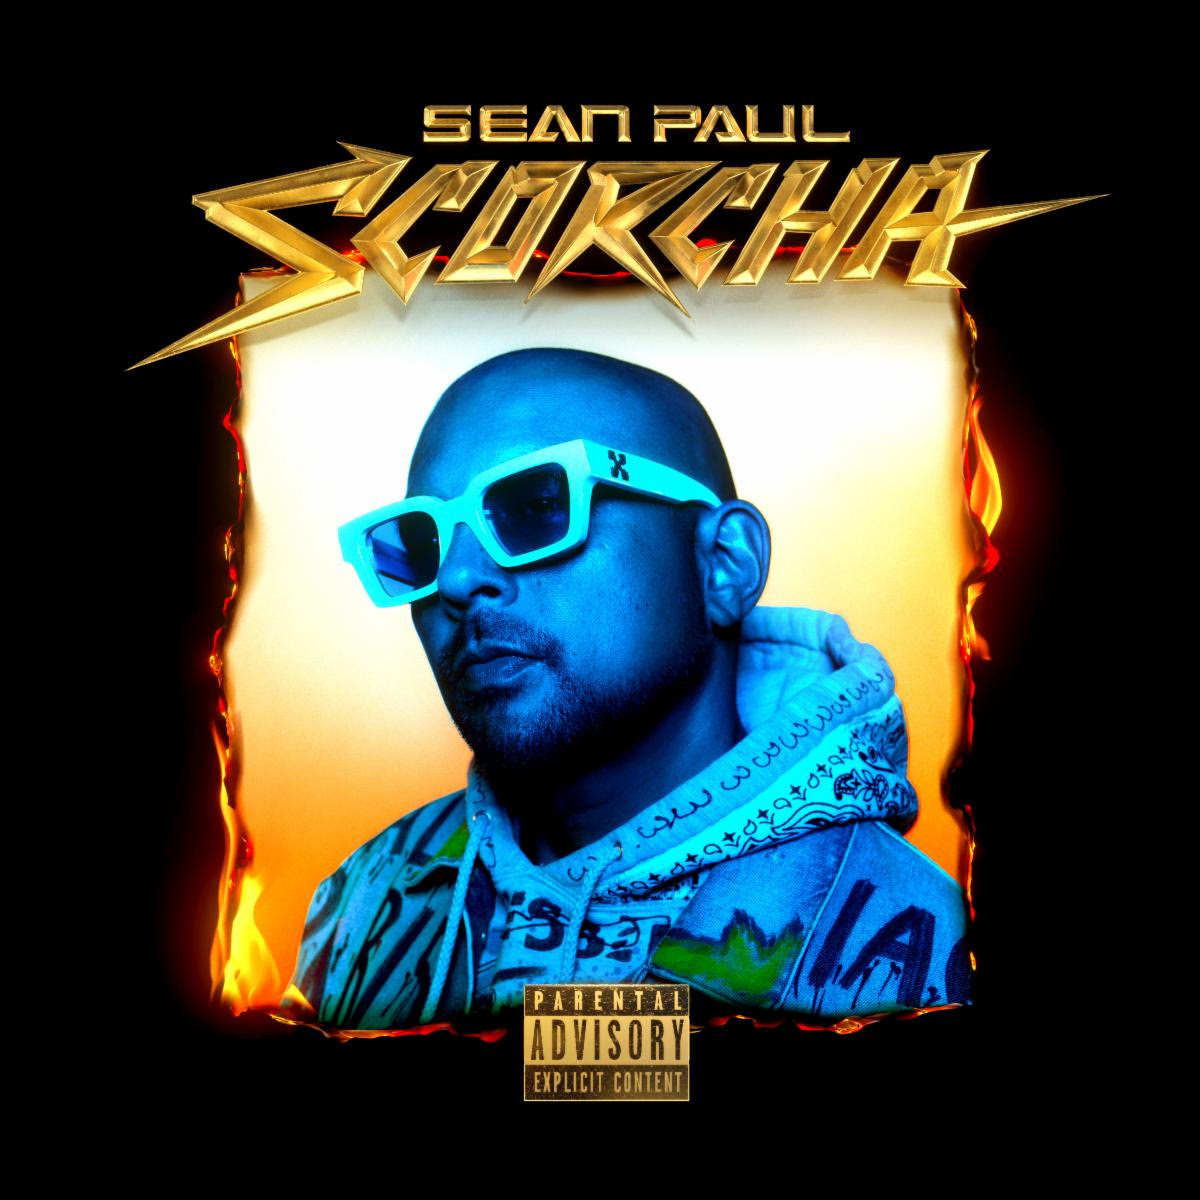 Sean Paul Returns With Red Hot New Album Scorcha - The Hype Magazine